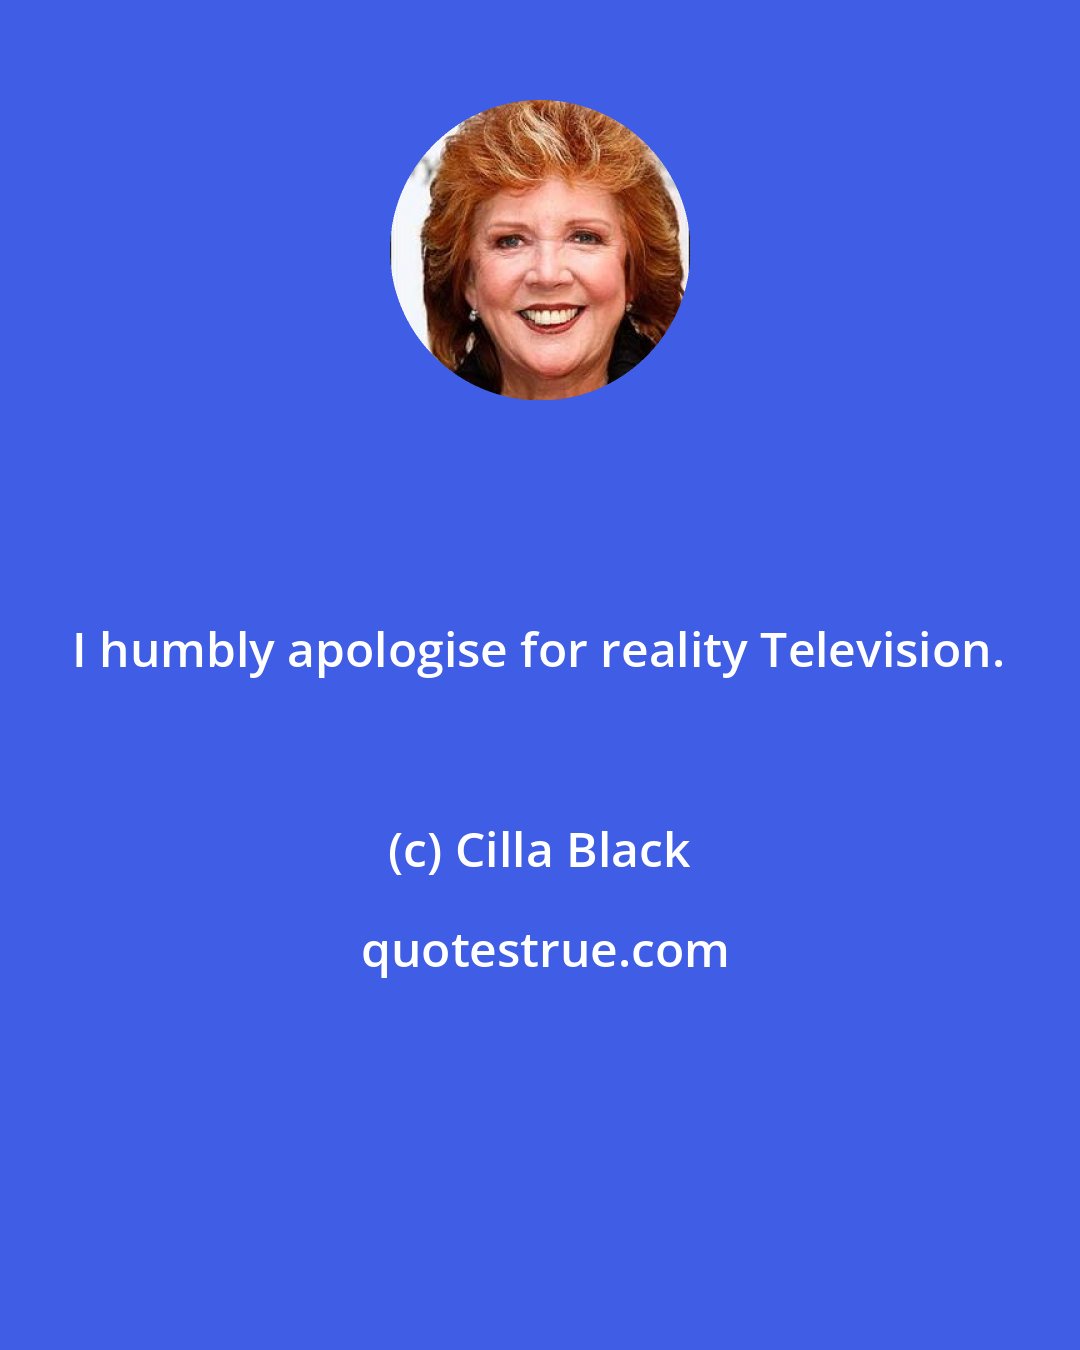 Cilla Black: I humbly apologise for reality Television.